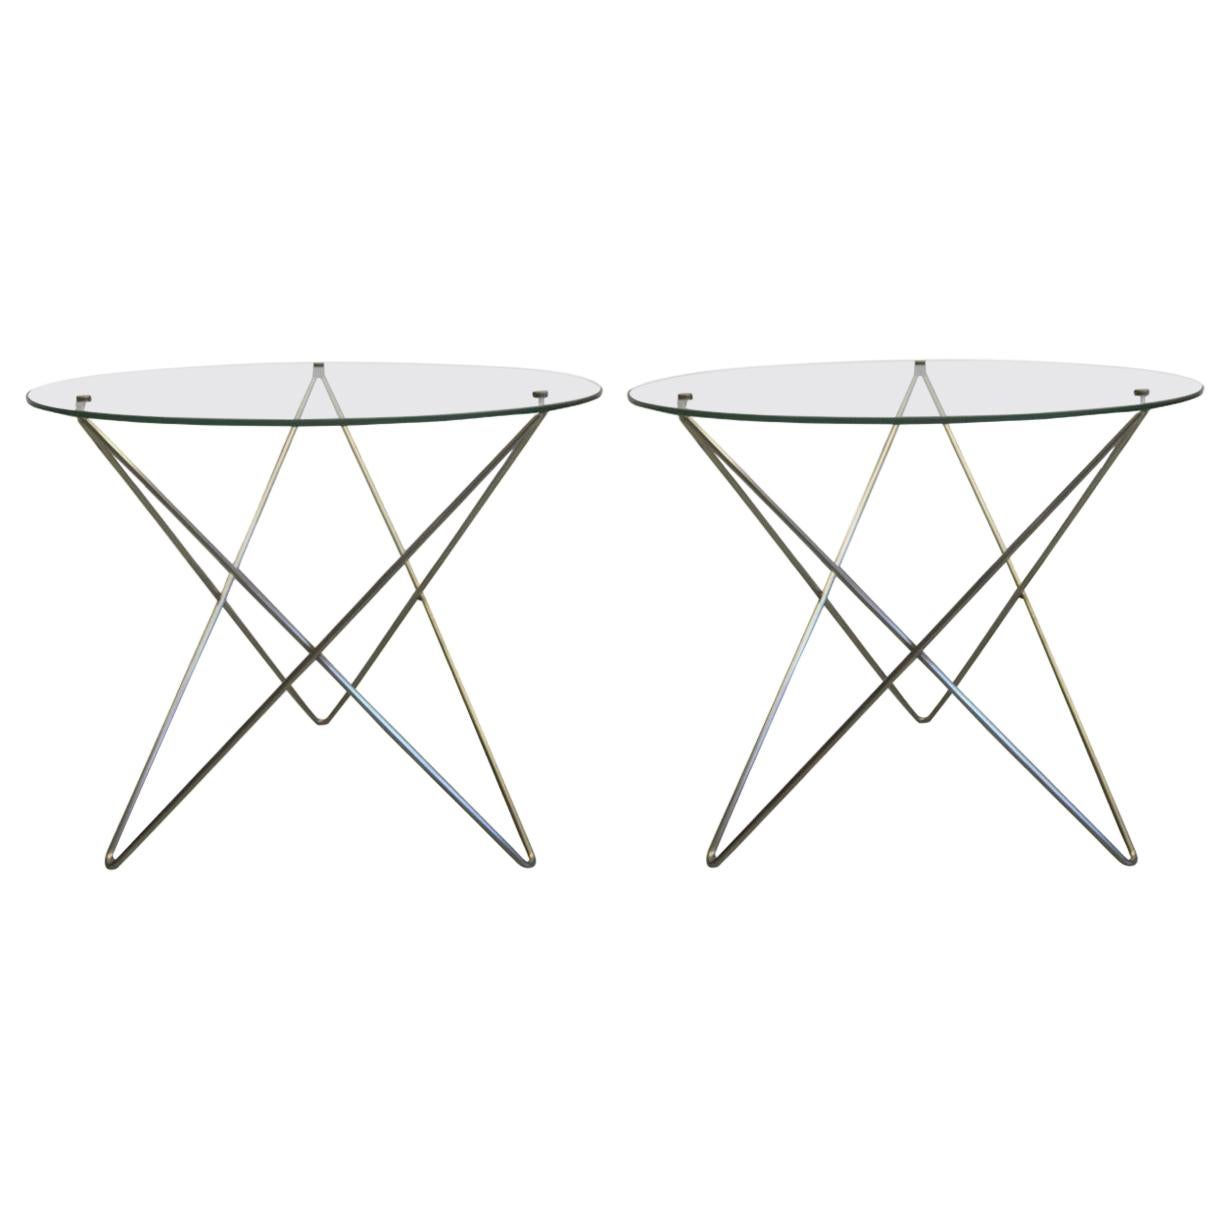 Italian Midcentury Stainless Steel and Glass Side Tables, Carlo Paccagnini, Pair